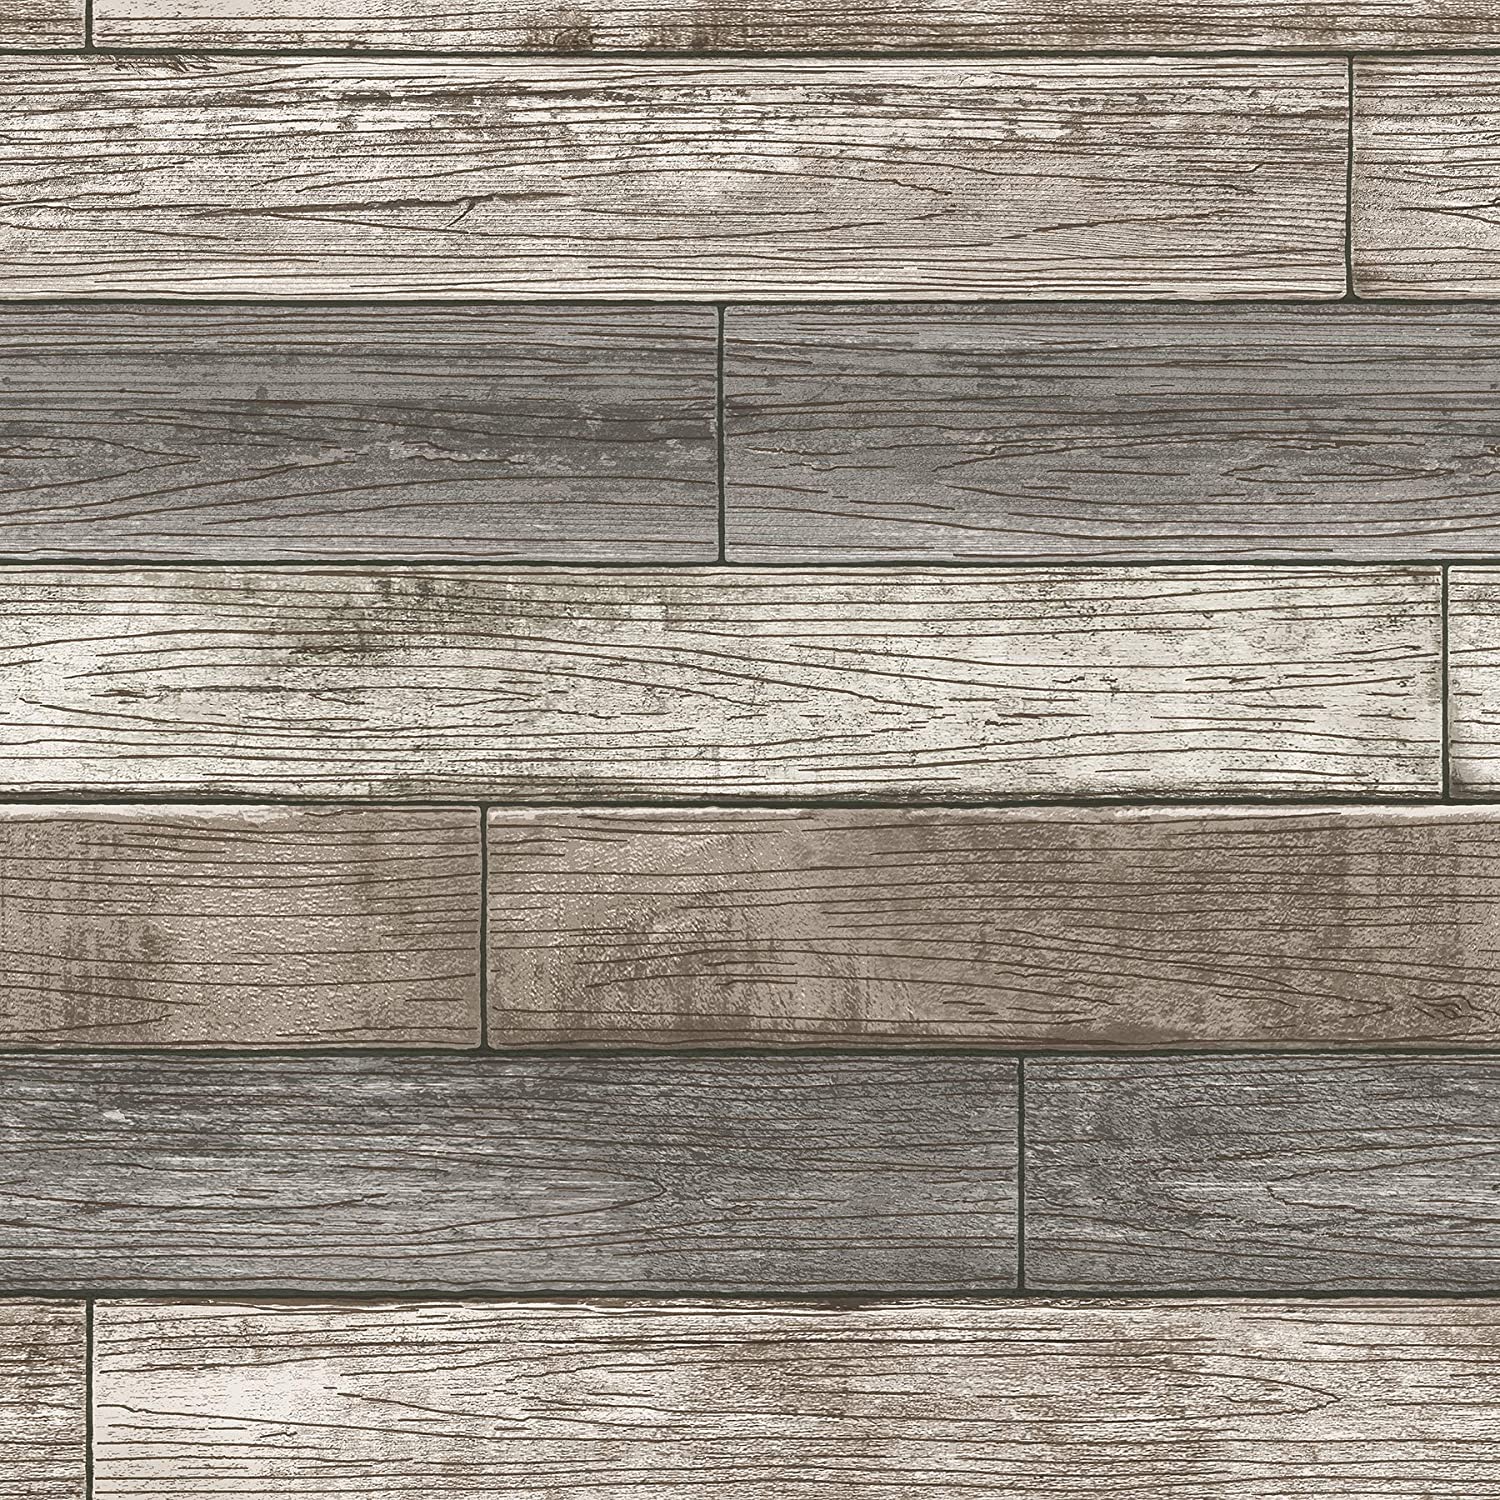 Amazoncom Arthouse Whitewashed Wood Effect Wallpaper  Panel Effect Look   Natural Distressed Weathered  Photographic Style  Realistic Design   White Brown Color Wallpaper 694700  Tools  Home Improvement